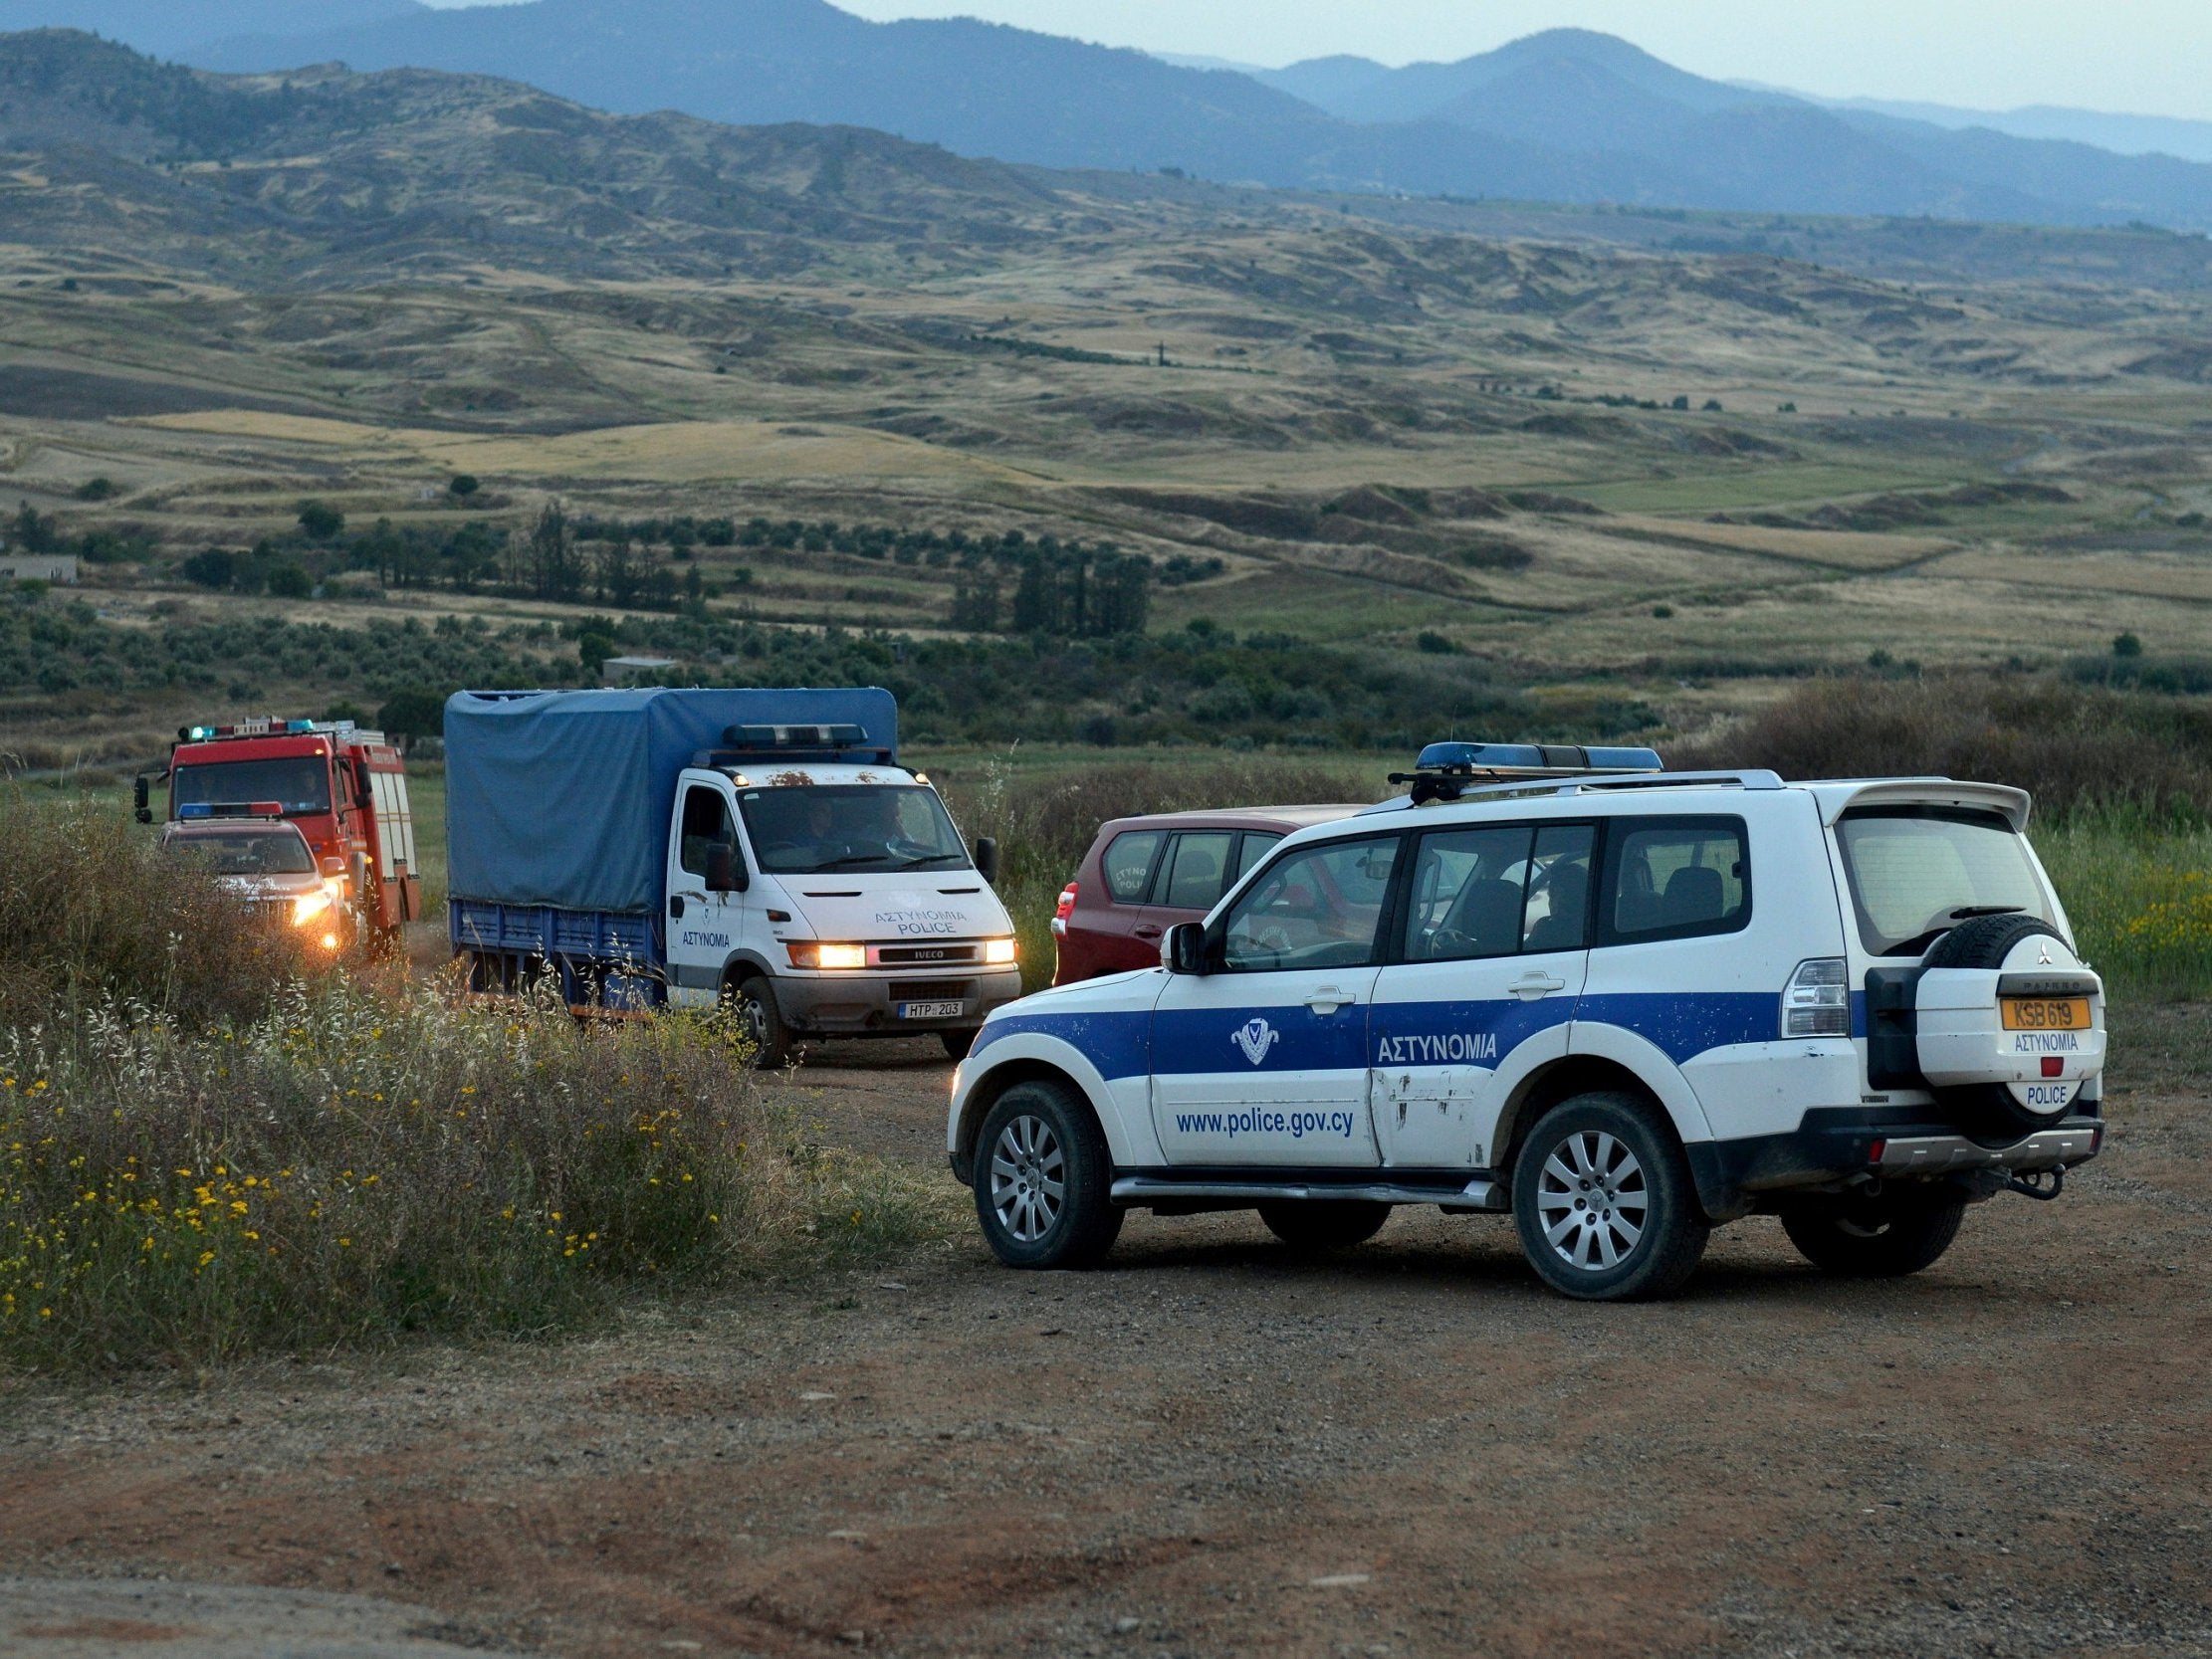 A police truck (rear left) carries a body found after investigators and police officers searched a field outside Orounta village, near the capital Nicosia, in Cyprus, on 25 April 2019.